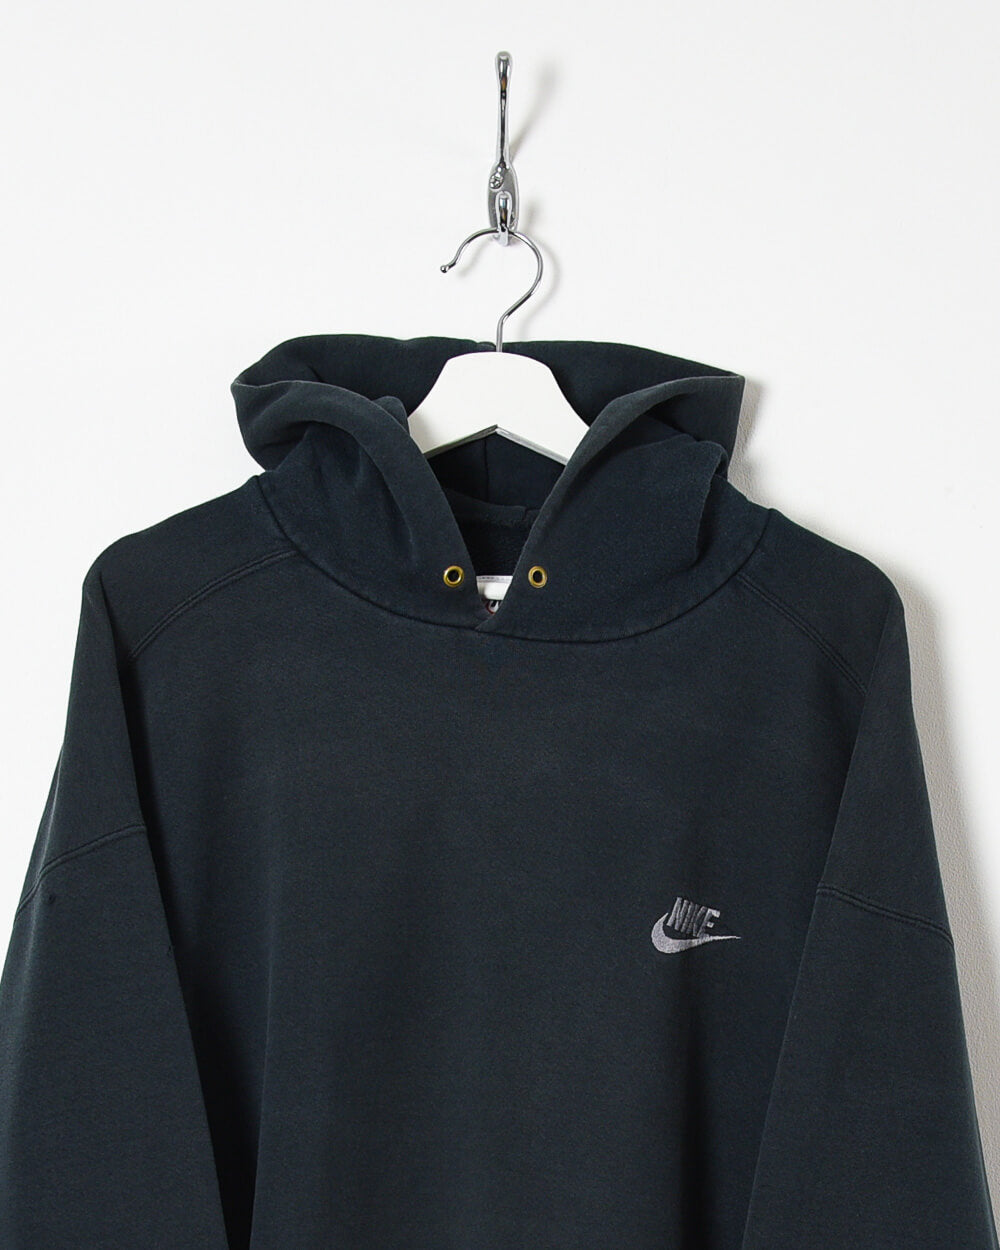 Nike Hoodie - XX-Large - Domno Vintage 90s, 80s, 00s Retro and Vintage Clothing 